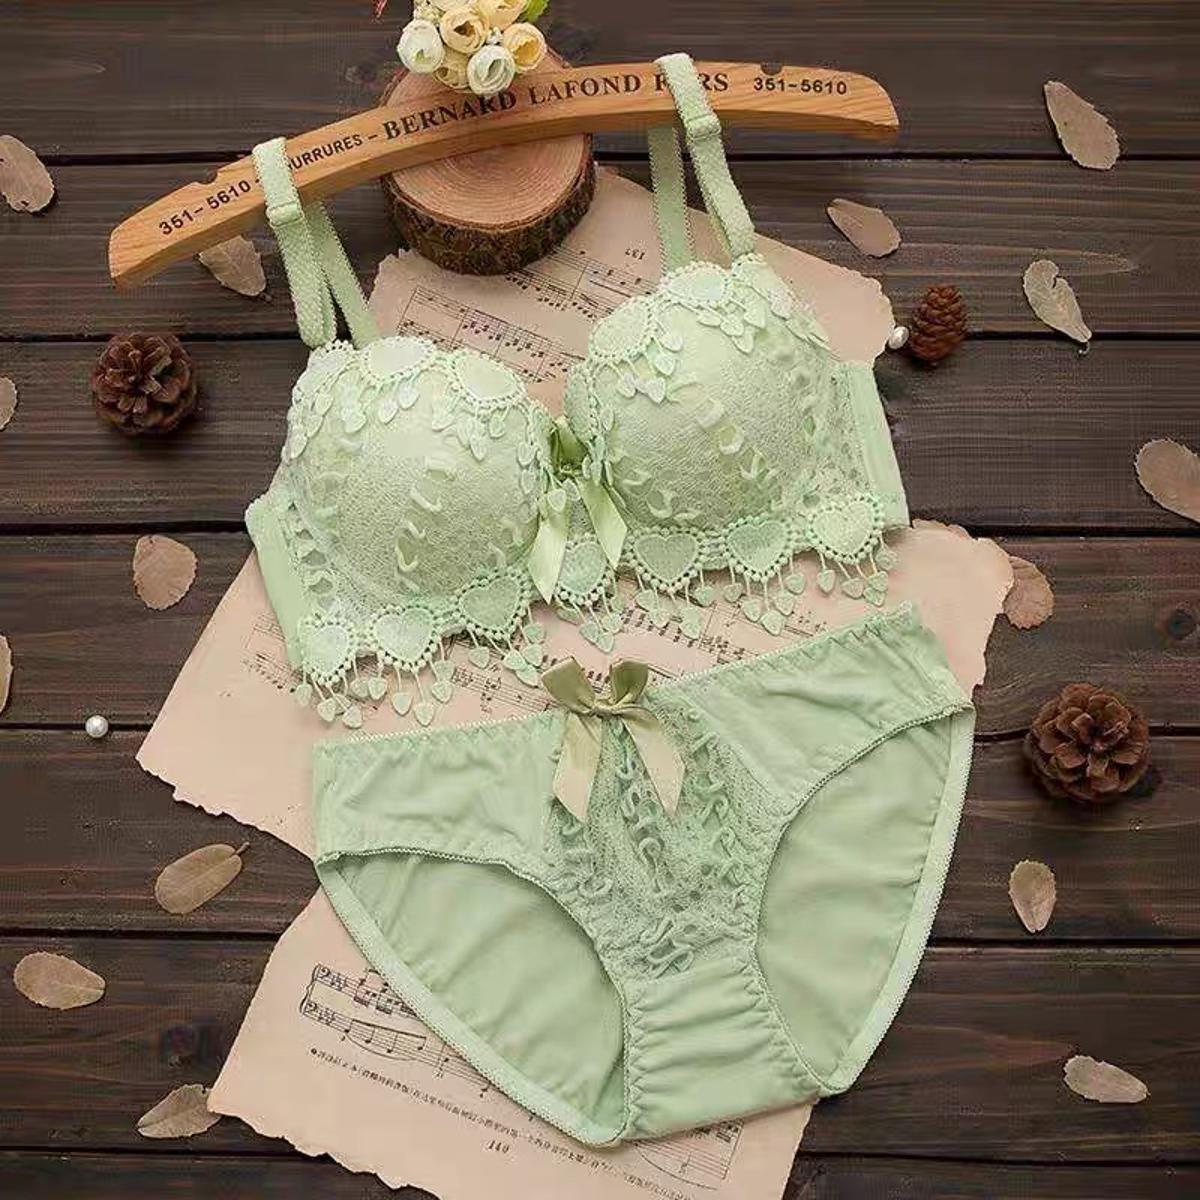 New Sexy Design Bra Set Unique Lace Style With painty Set For Women Padded  or Removable Pad Wire Bra For Girls Net Style Underwear (skin, blue, red,  black and Green color available